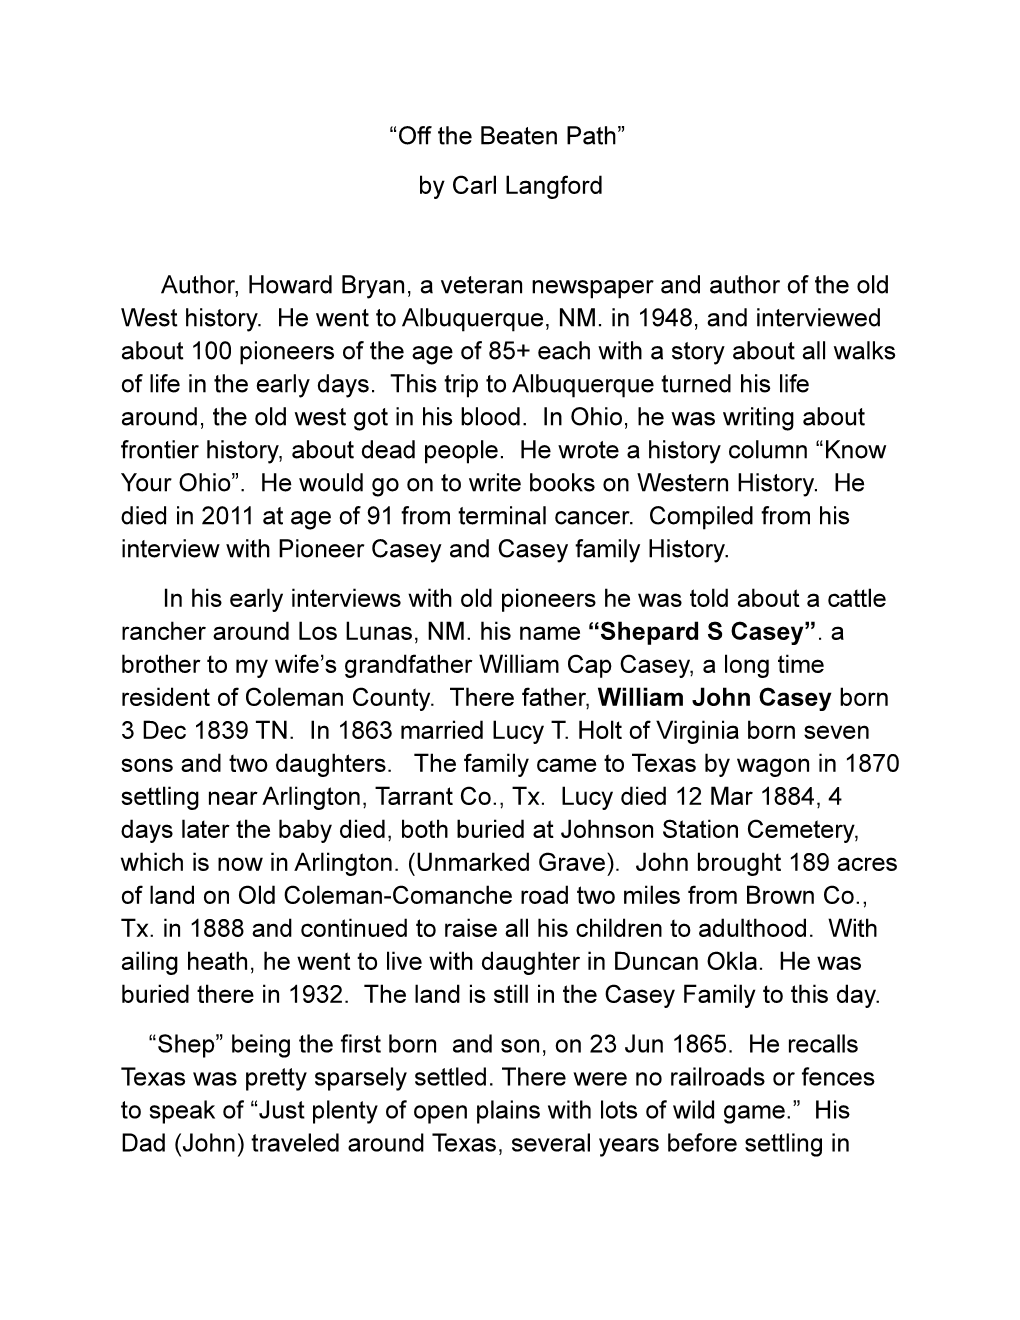 “Off the Beaten Path” by Carl Langford Author, Howard Bryan, a Veteran Newspaper and Author of the Old West History. He